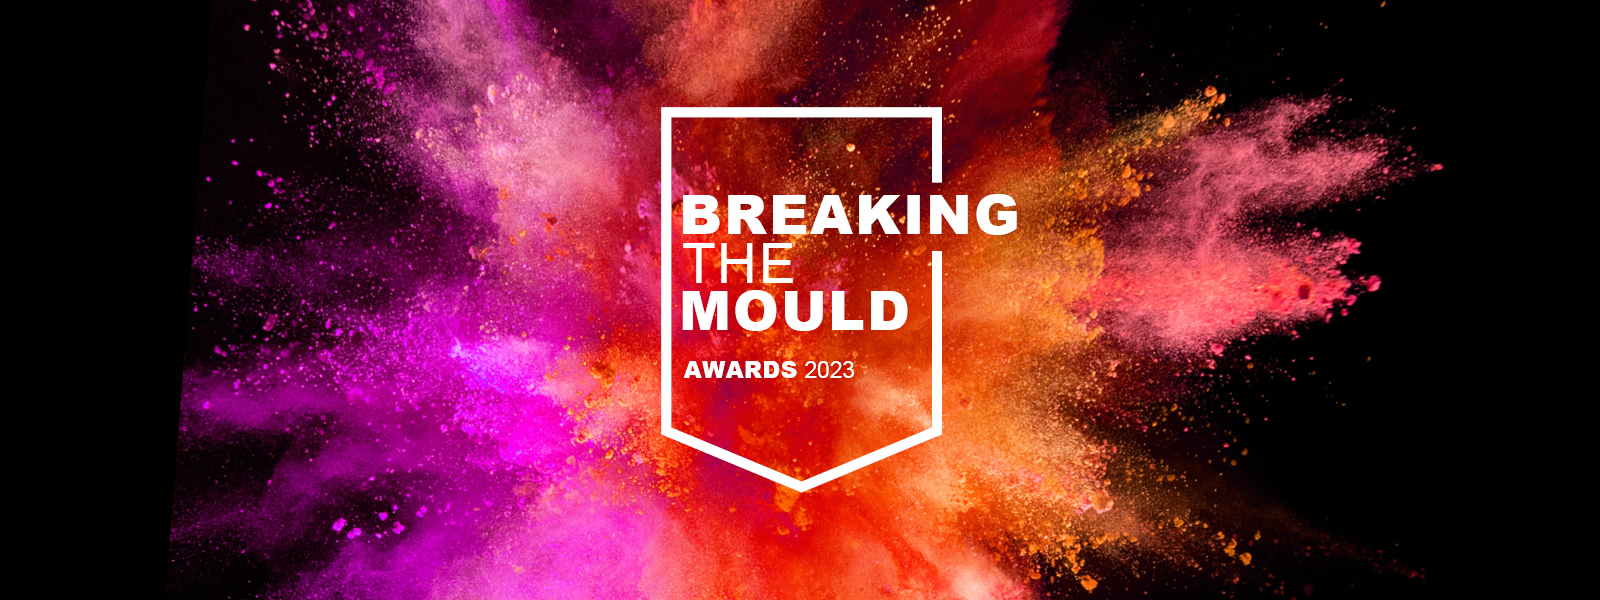 In the final – Noreus Ltd is shortlisted for a top honour in the Keele University Breaking the Mould awards 2023.